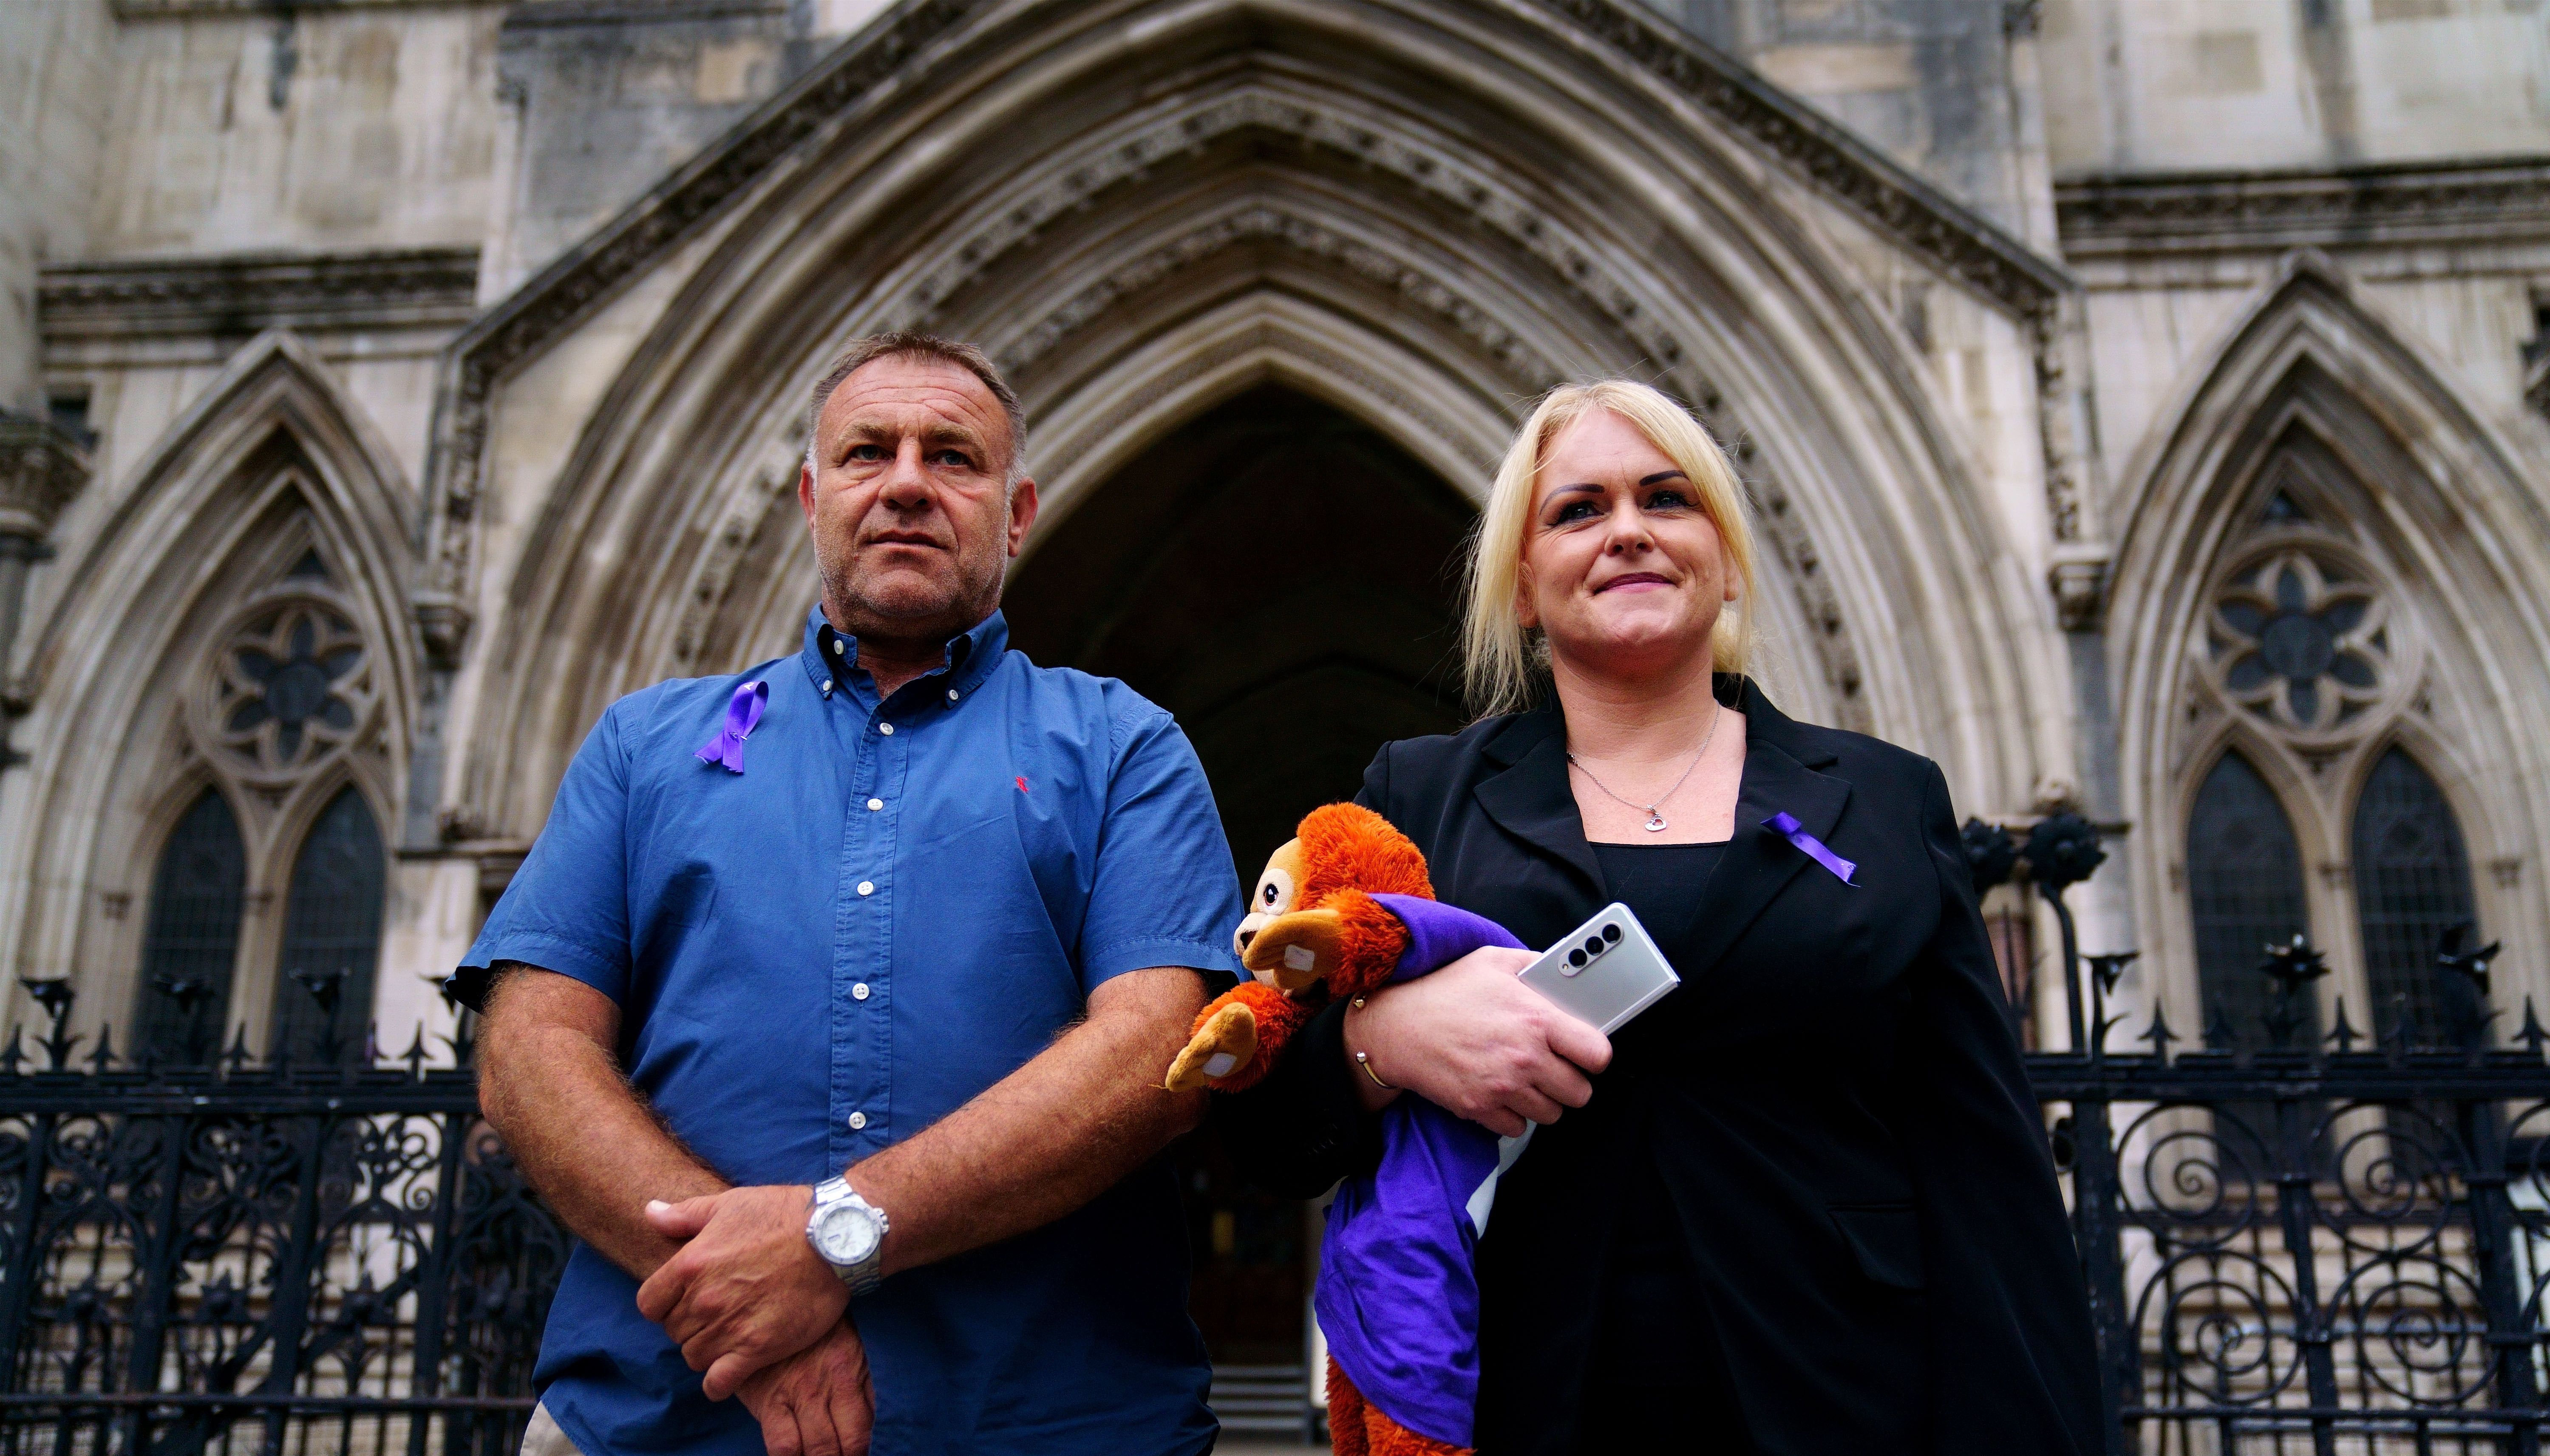 The parents of Archie Battersbee, Paul Battersbee and Hollie Dance, leave the Royal Courts Of Justice in London, they want Court of Appeal judges to overturn a ruling by High Court judge Mr Justice Hayden, who decided that life-support treatment for their 12-year-old son who suffered a %22devastating%22 brain injury could stop.